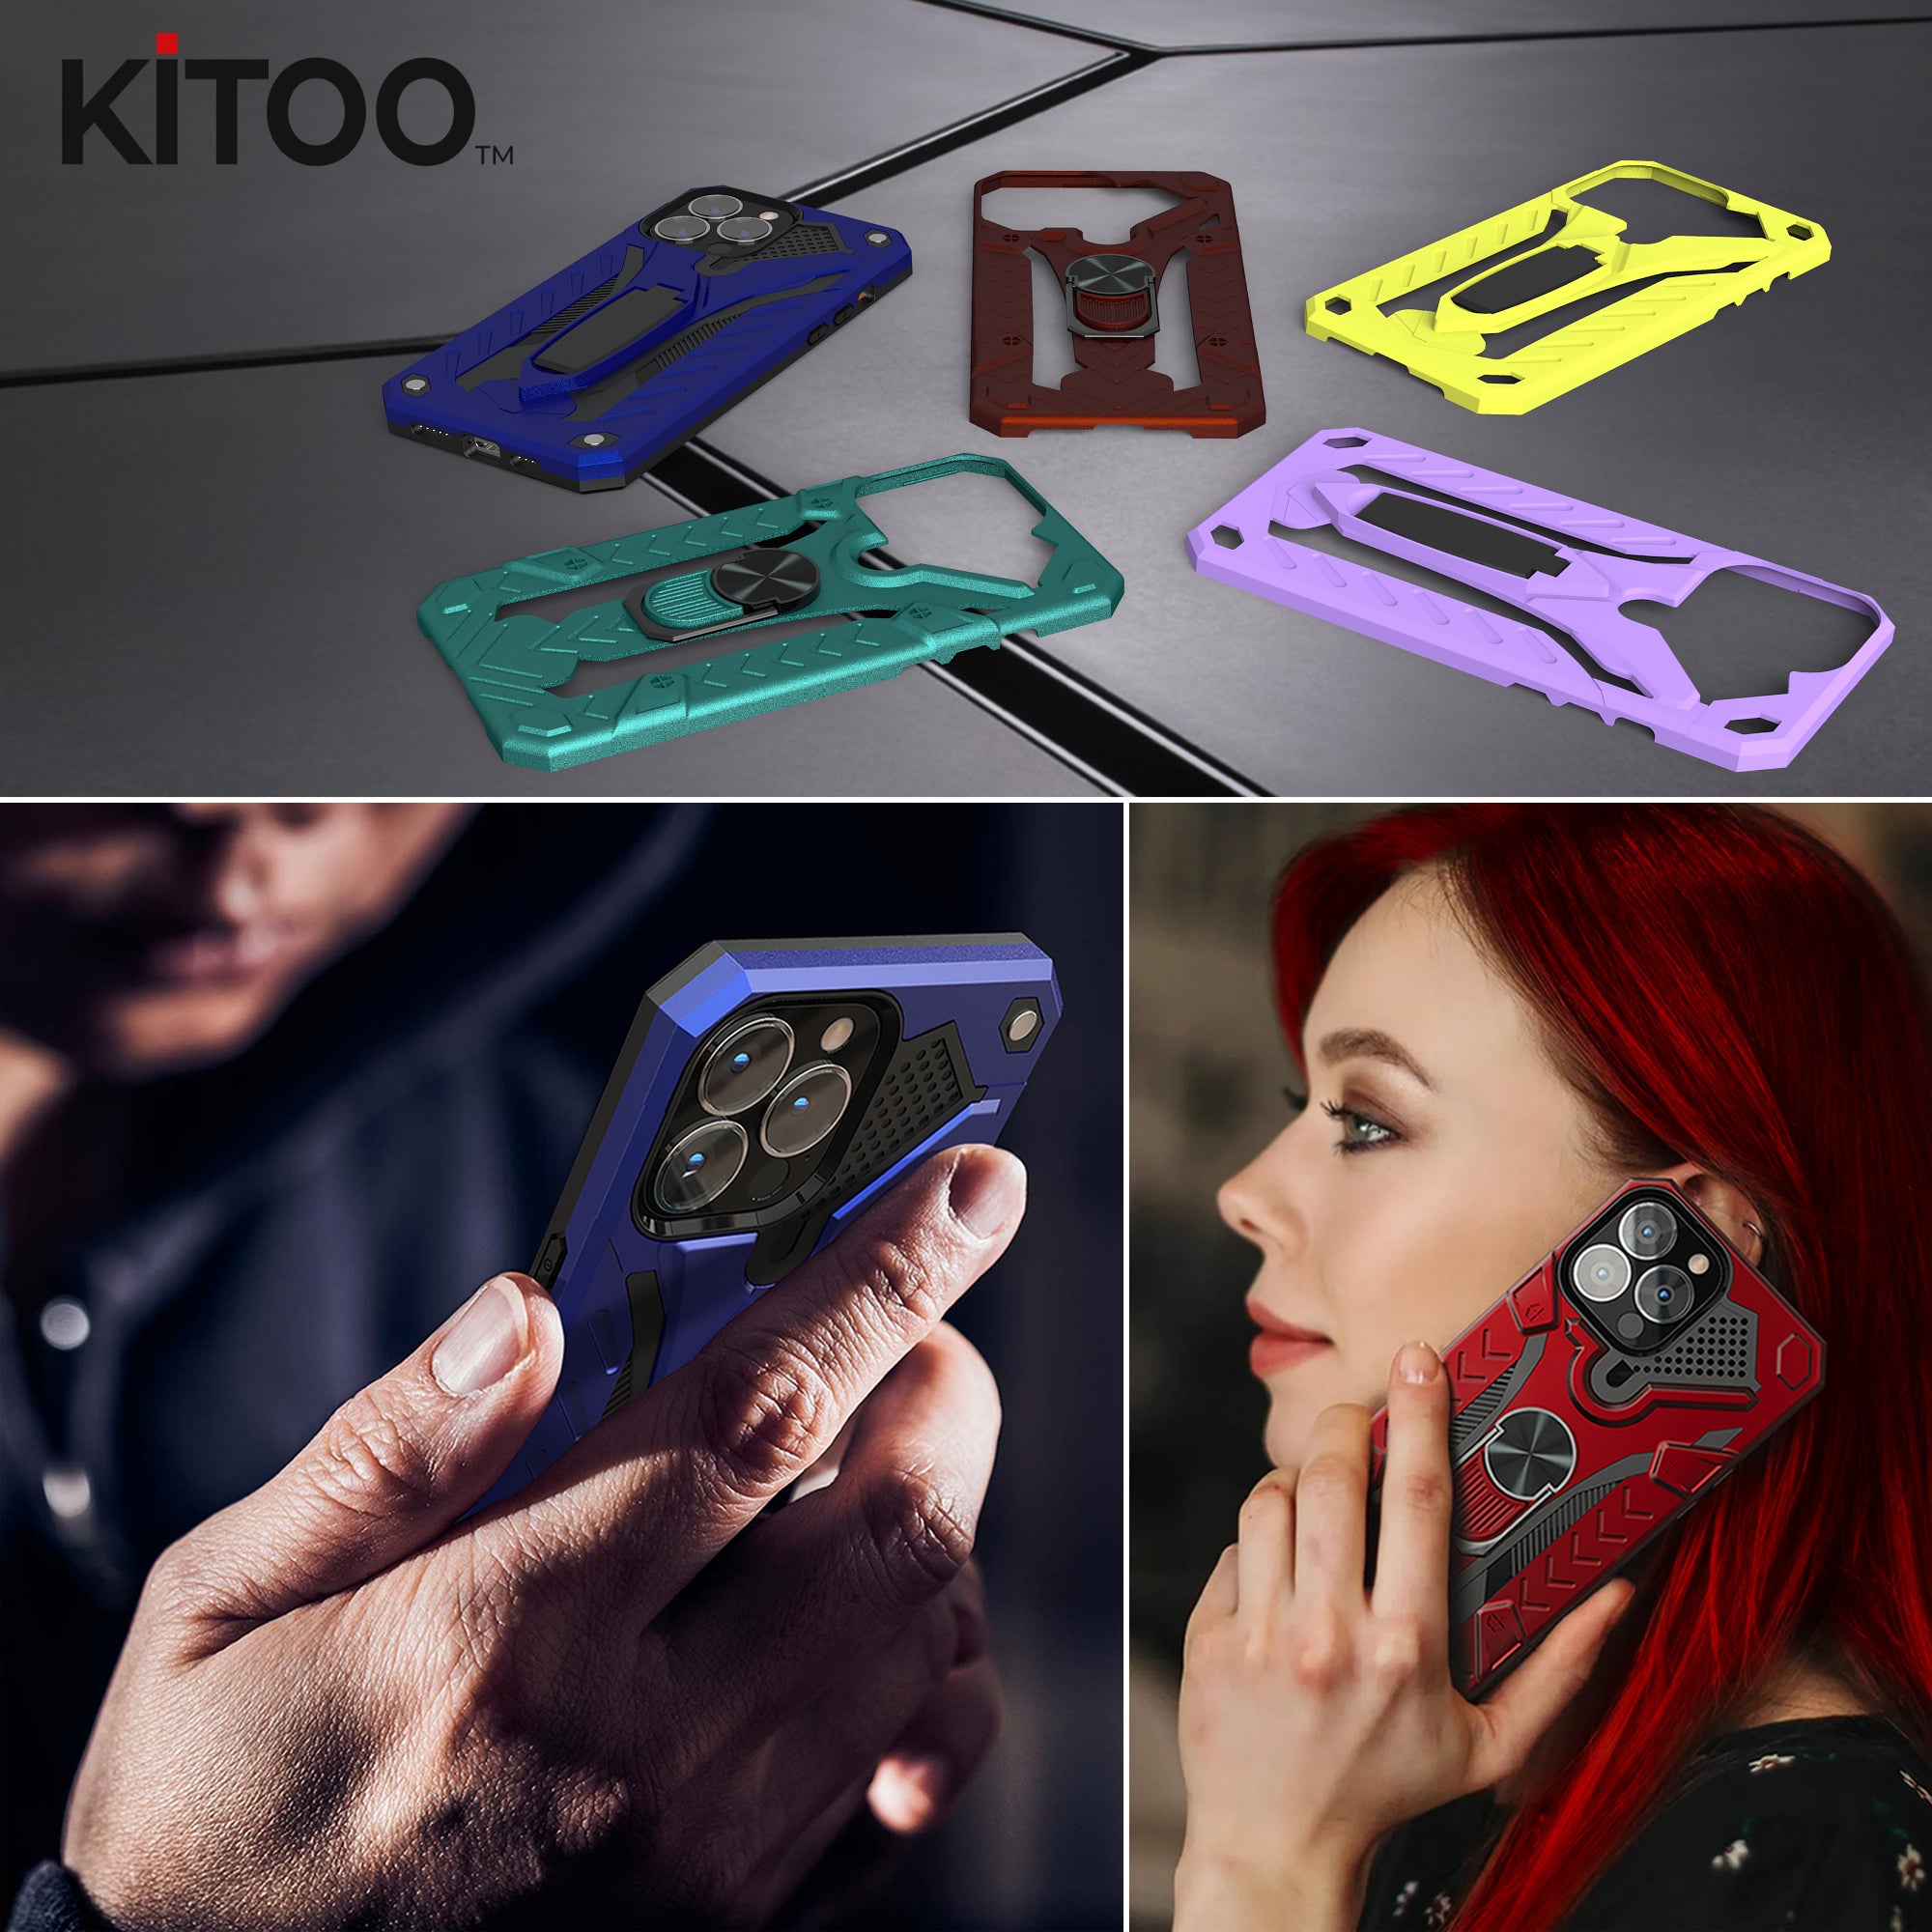 Kitoo Kickstand Panel Designed for iPhone 13 Pro case (Spare Part only) - Black